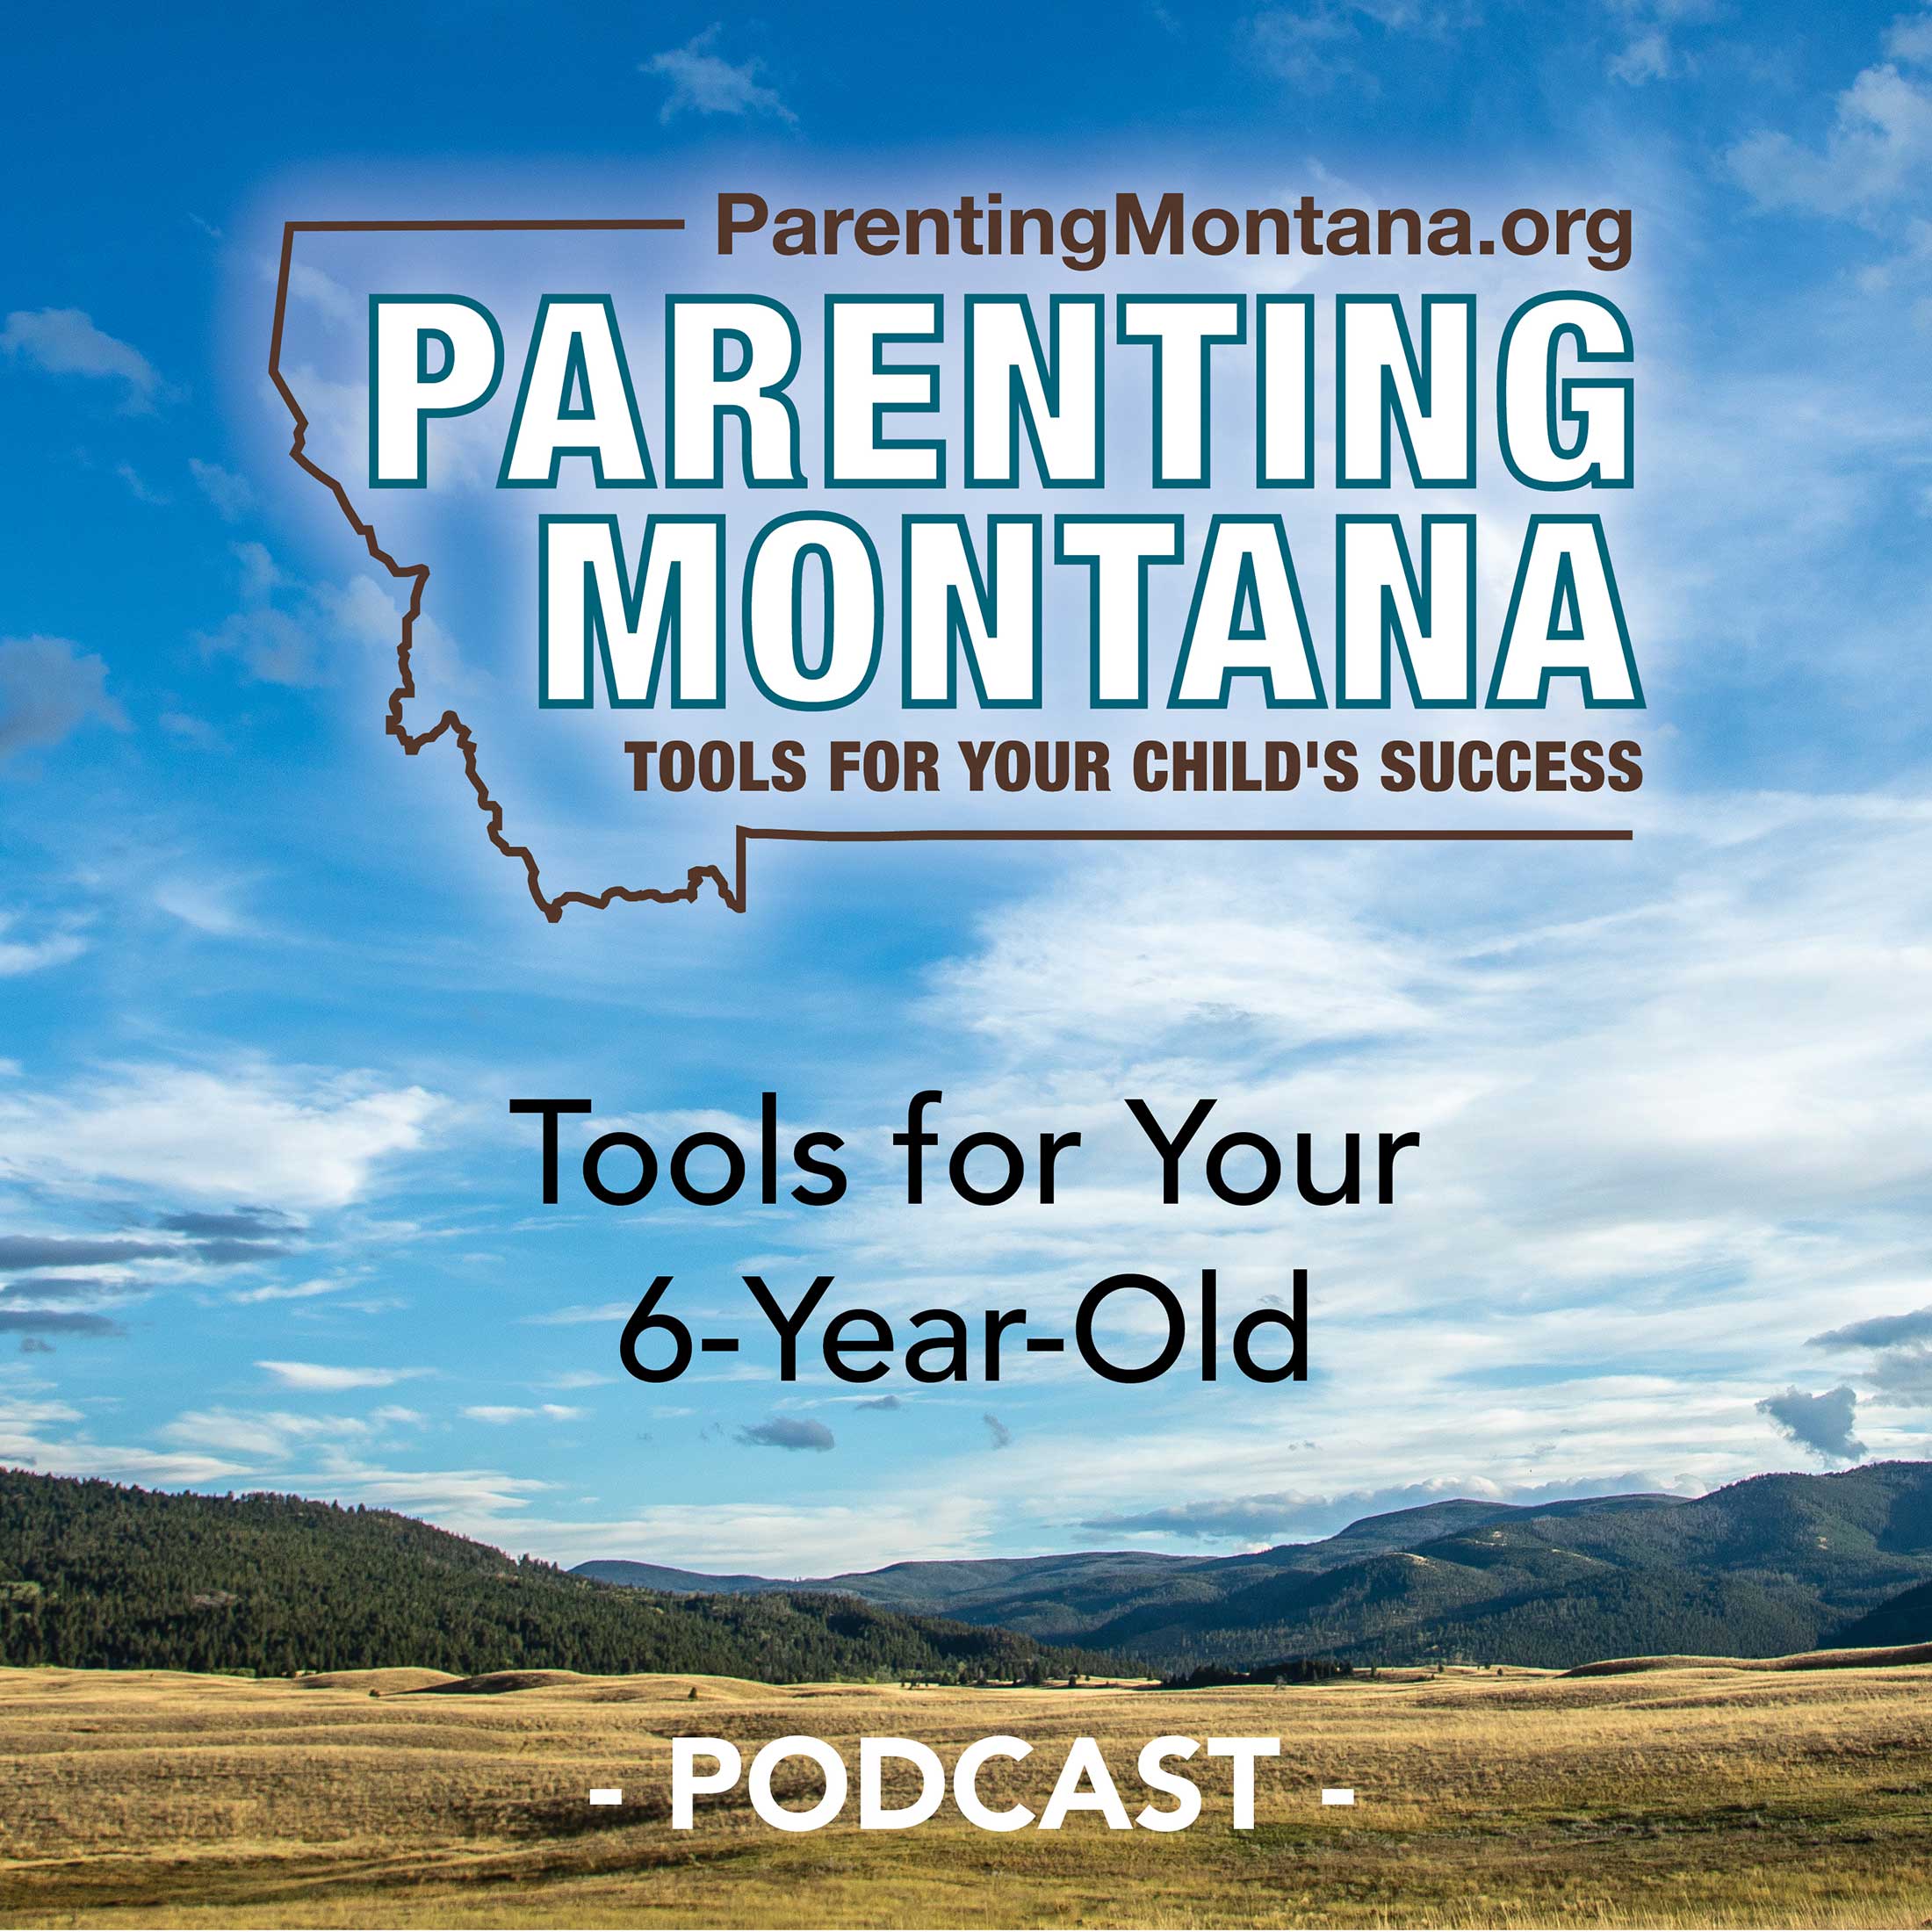 Artwork for podcast 6-Year-Old Parenting Montana Tools